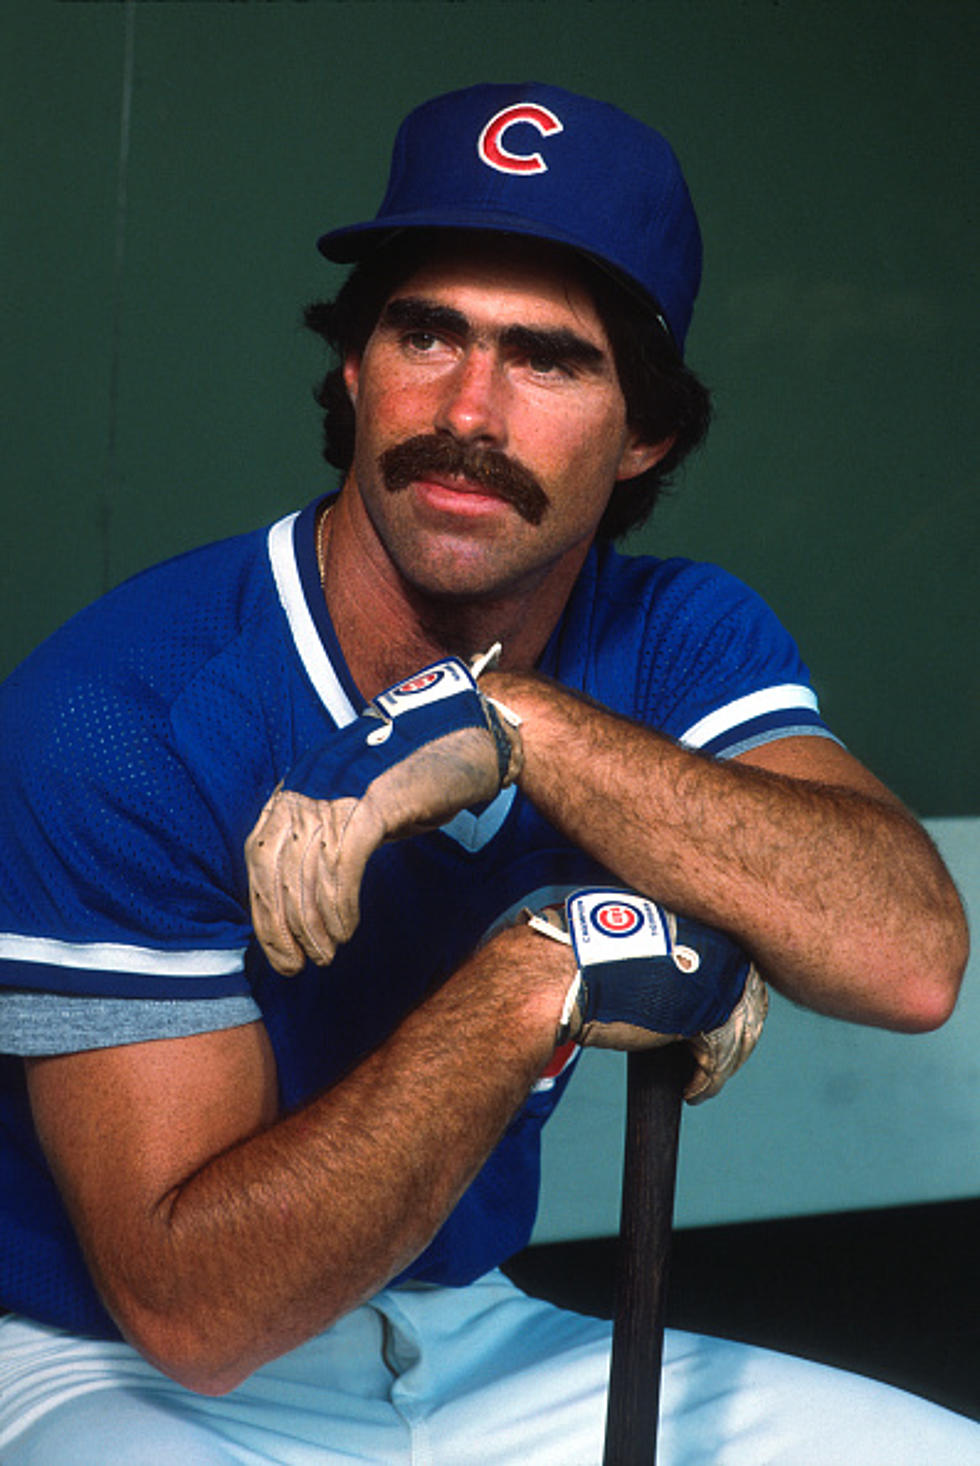 Fans and Friends Share Their Thoughts On Bill Buckner